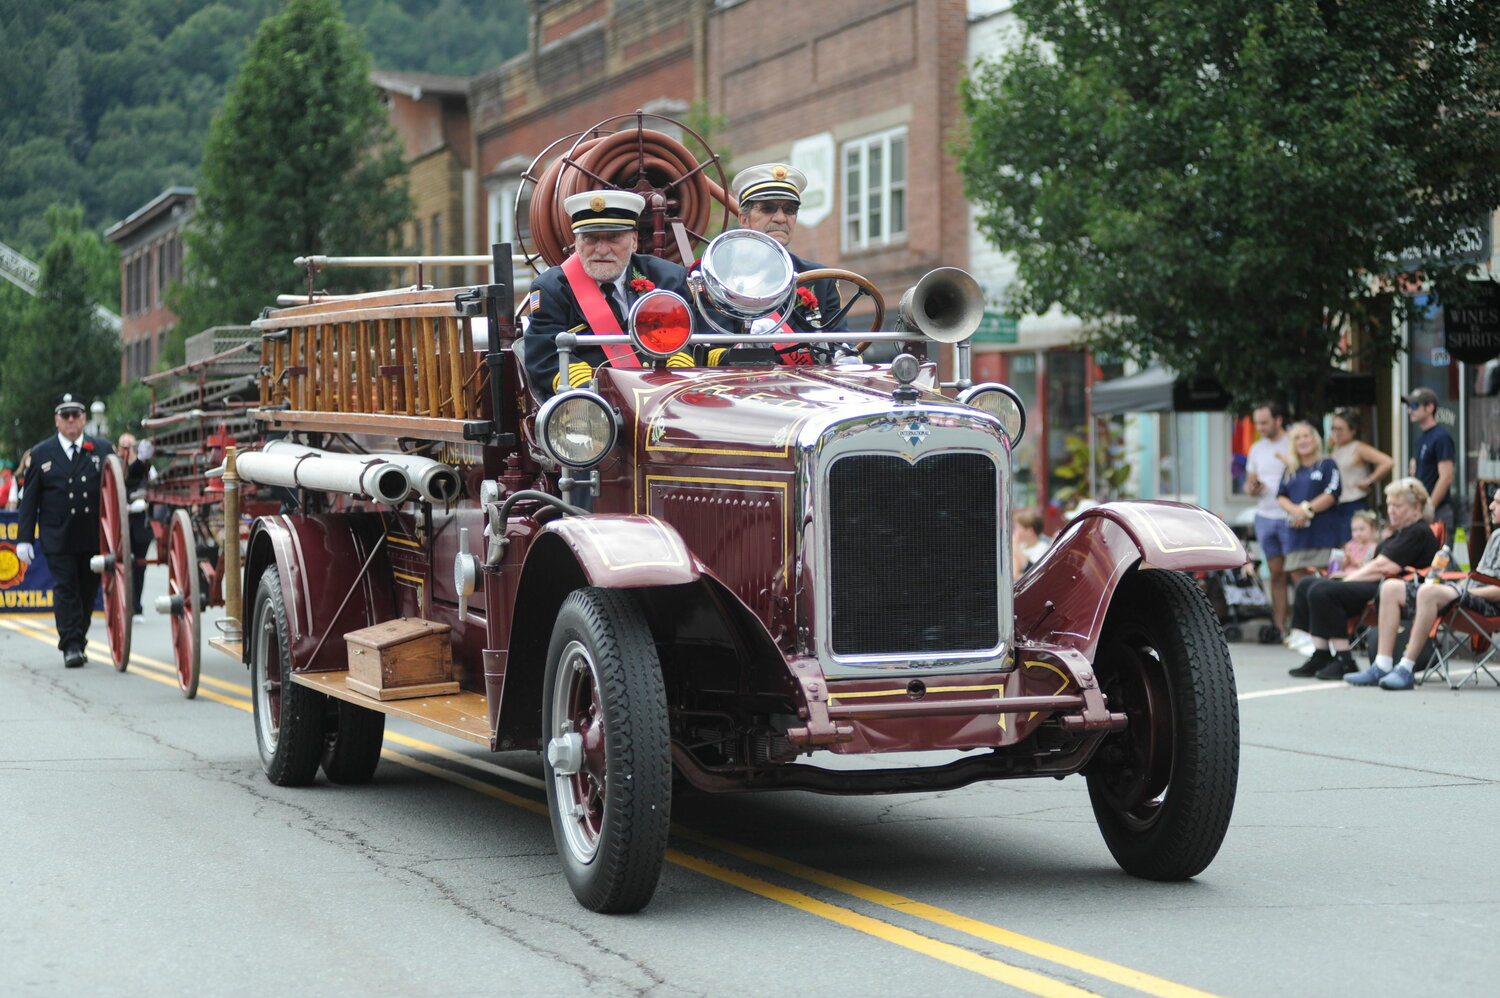 Roscoe’s ex chief Pete Passaro, catches a ride with ex-chief Steve Hecht, Sr. in the department’s faithfully restored 1929 International apparatus. Both former chiefs were honored as Grand Marshals. ..